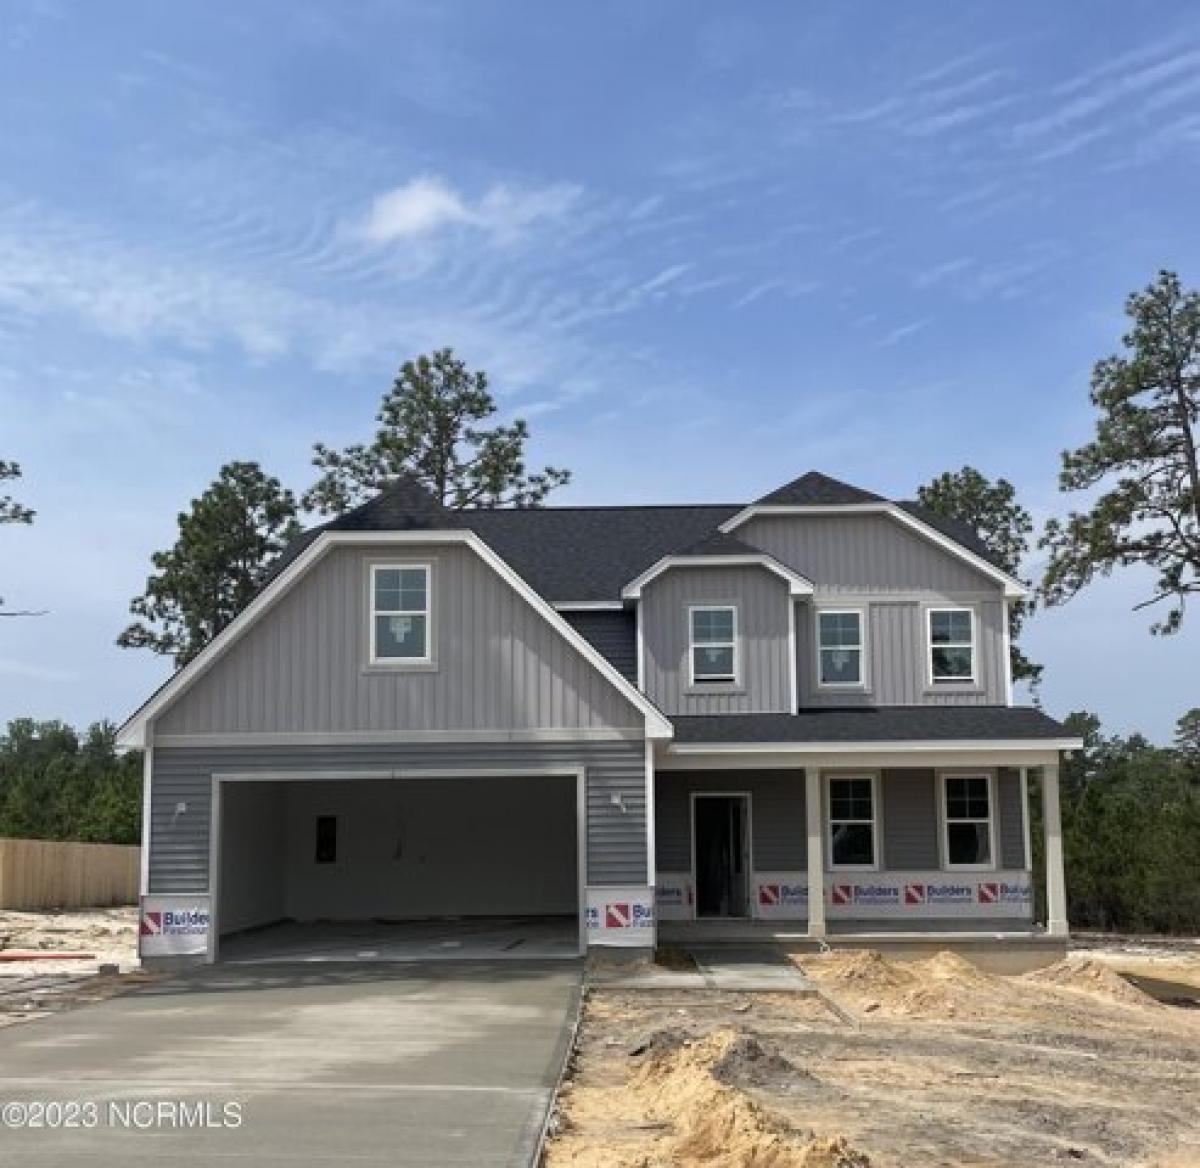 Picture of Home For Sale in West End, North Carolina, United States